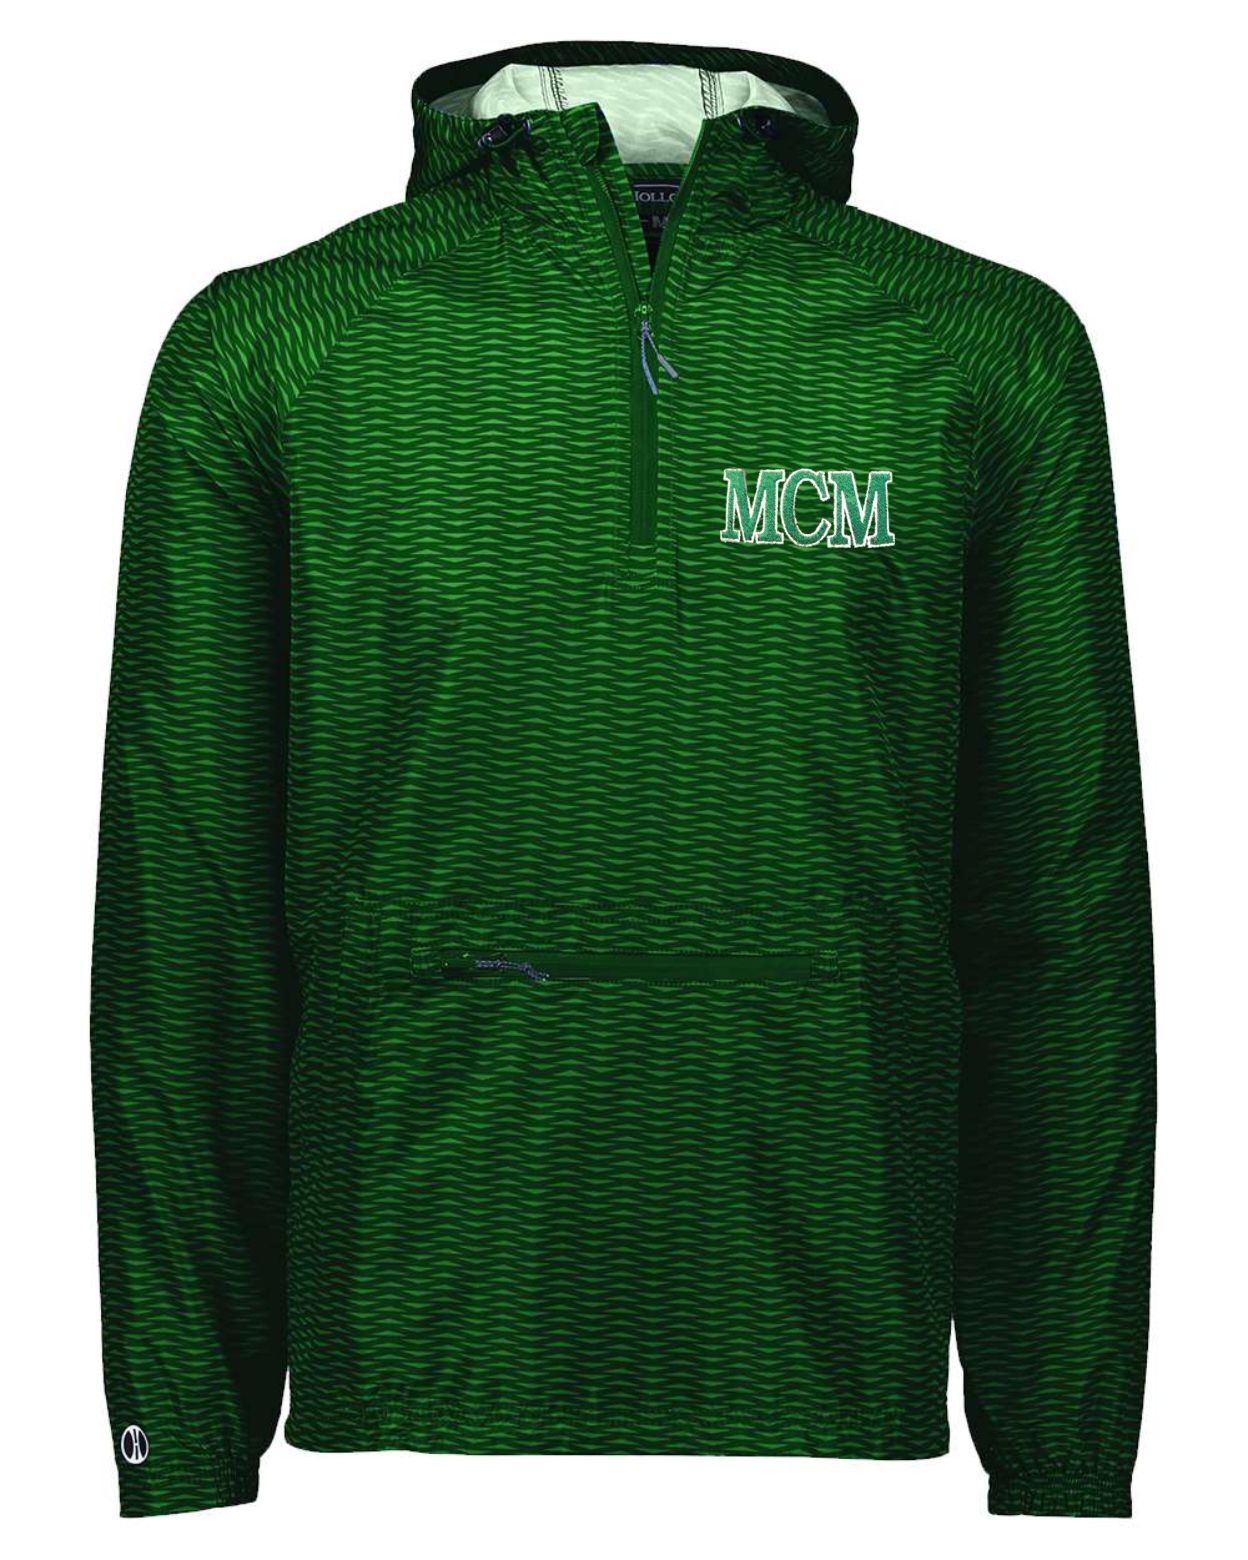 MCM Fighting Cougars Packable Quarter Zip Jacket - Forest